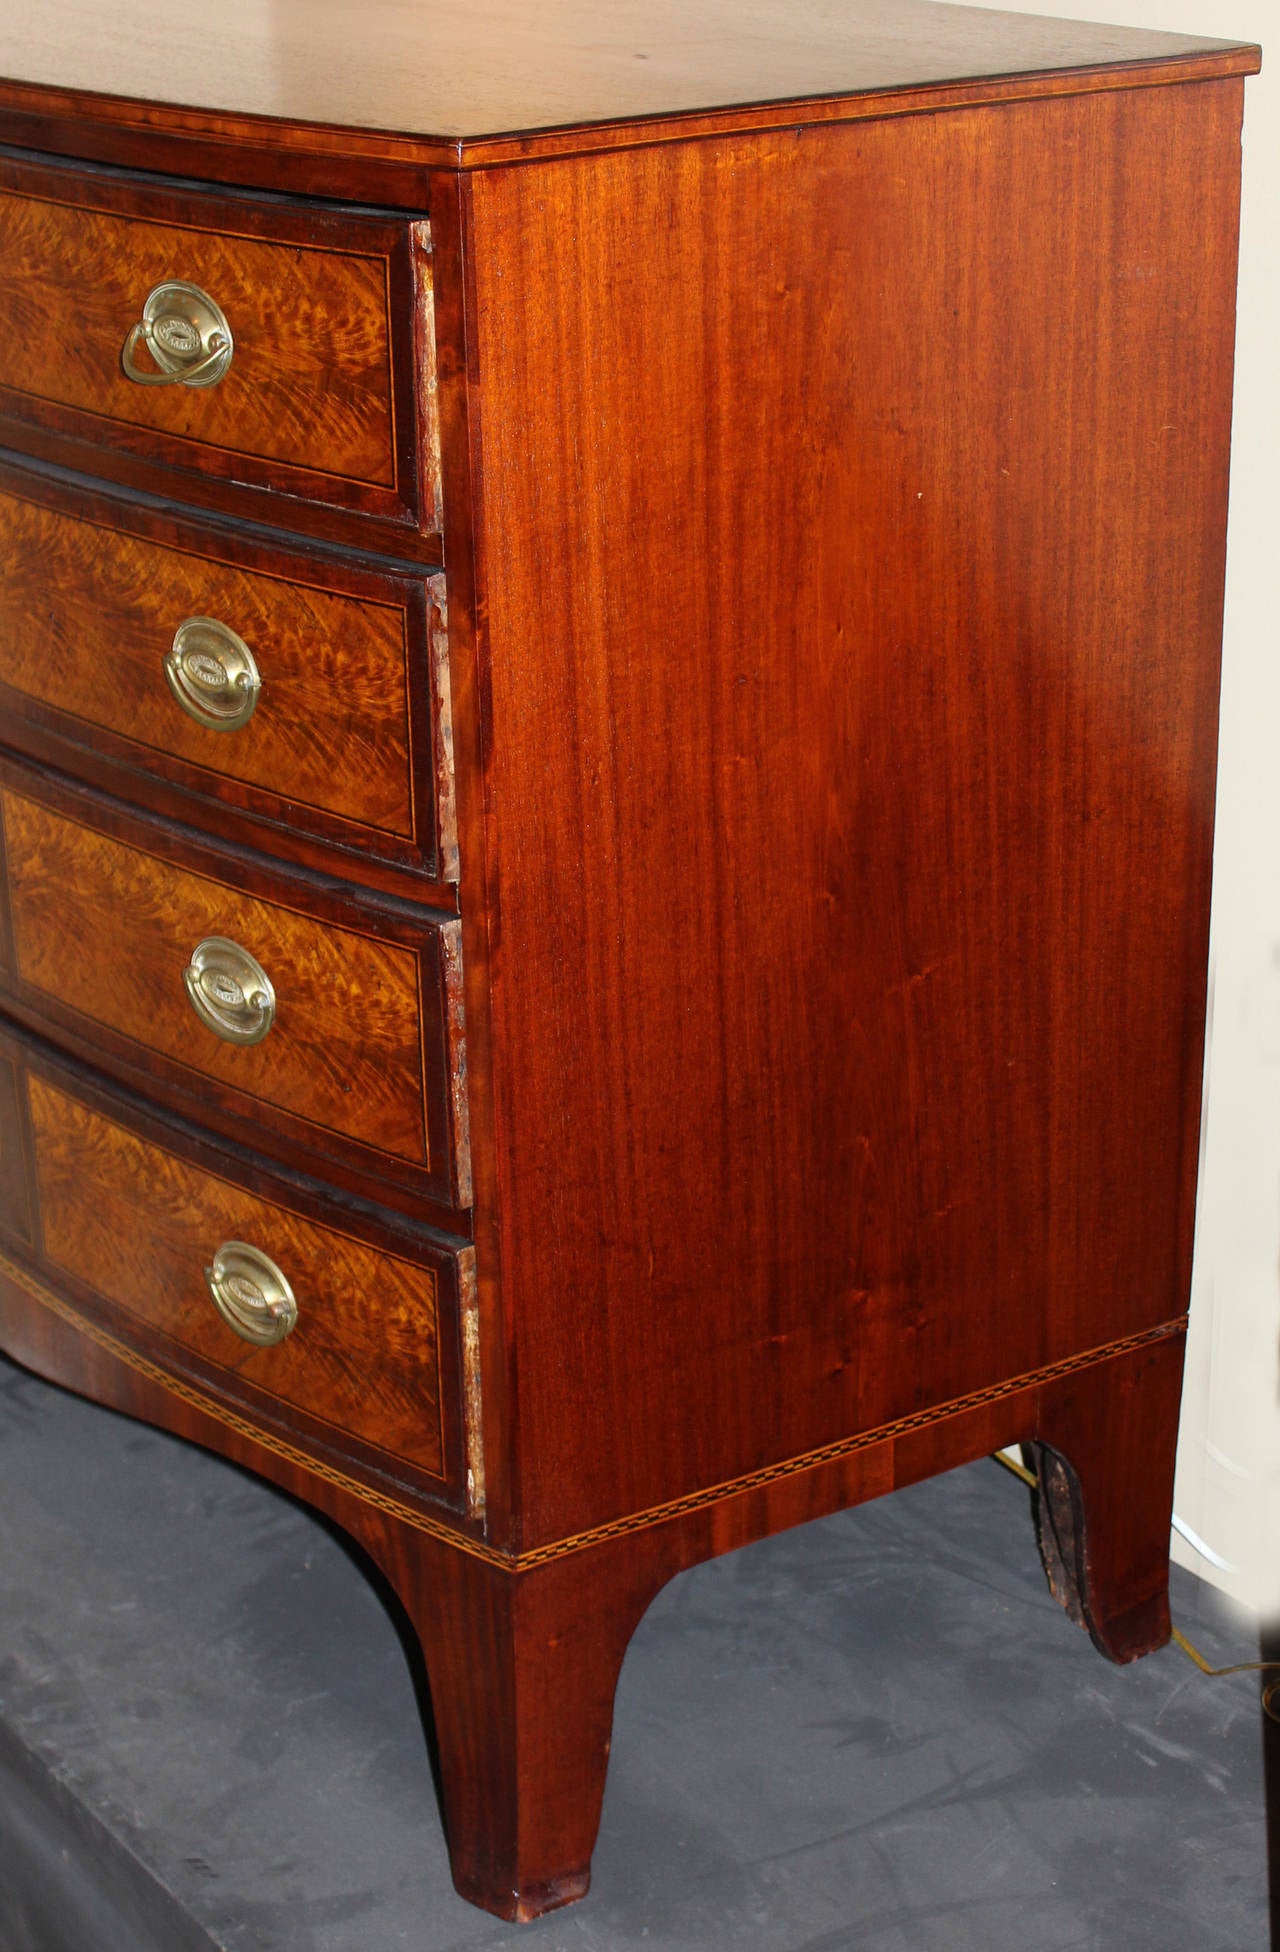 An exceptional late 18th century Federal mahogany bow front chest with wonderful oval and rectangular flame birch veneers, along with lovely satinwood checkered and line inlay, period brass pulls, and replaced escutcheons.Probably from Portsmouth,